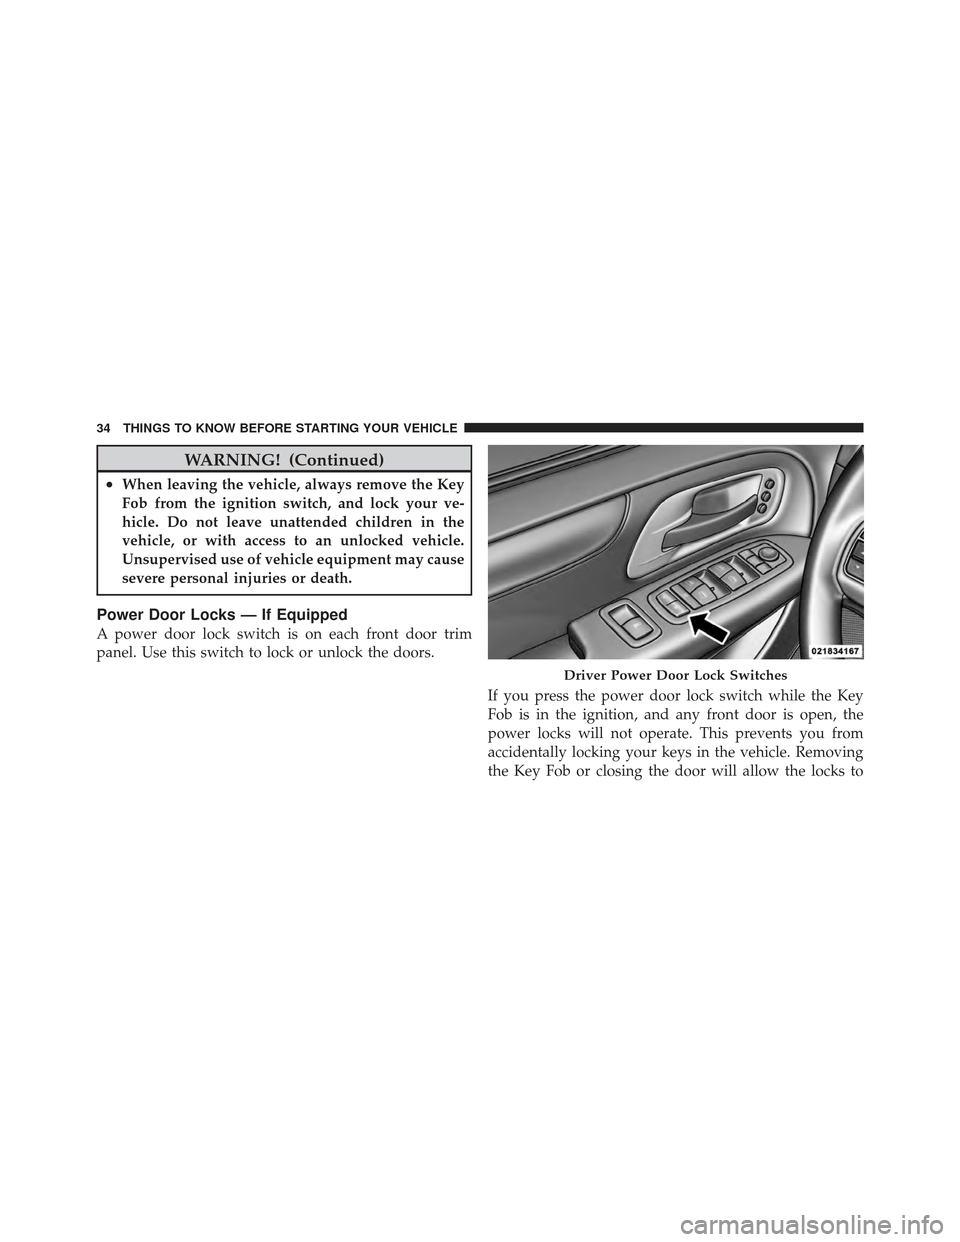 DODGE GRAND CARAVAN 2011 5.G Owners Guide WARNING! (Continued)
•When leaving the vehicle, always remove the Key
Fob from the ignition switch, and lock your ve-
hicle. Do not leave unattended children in the
vehicle, or with access to an unl